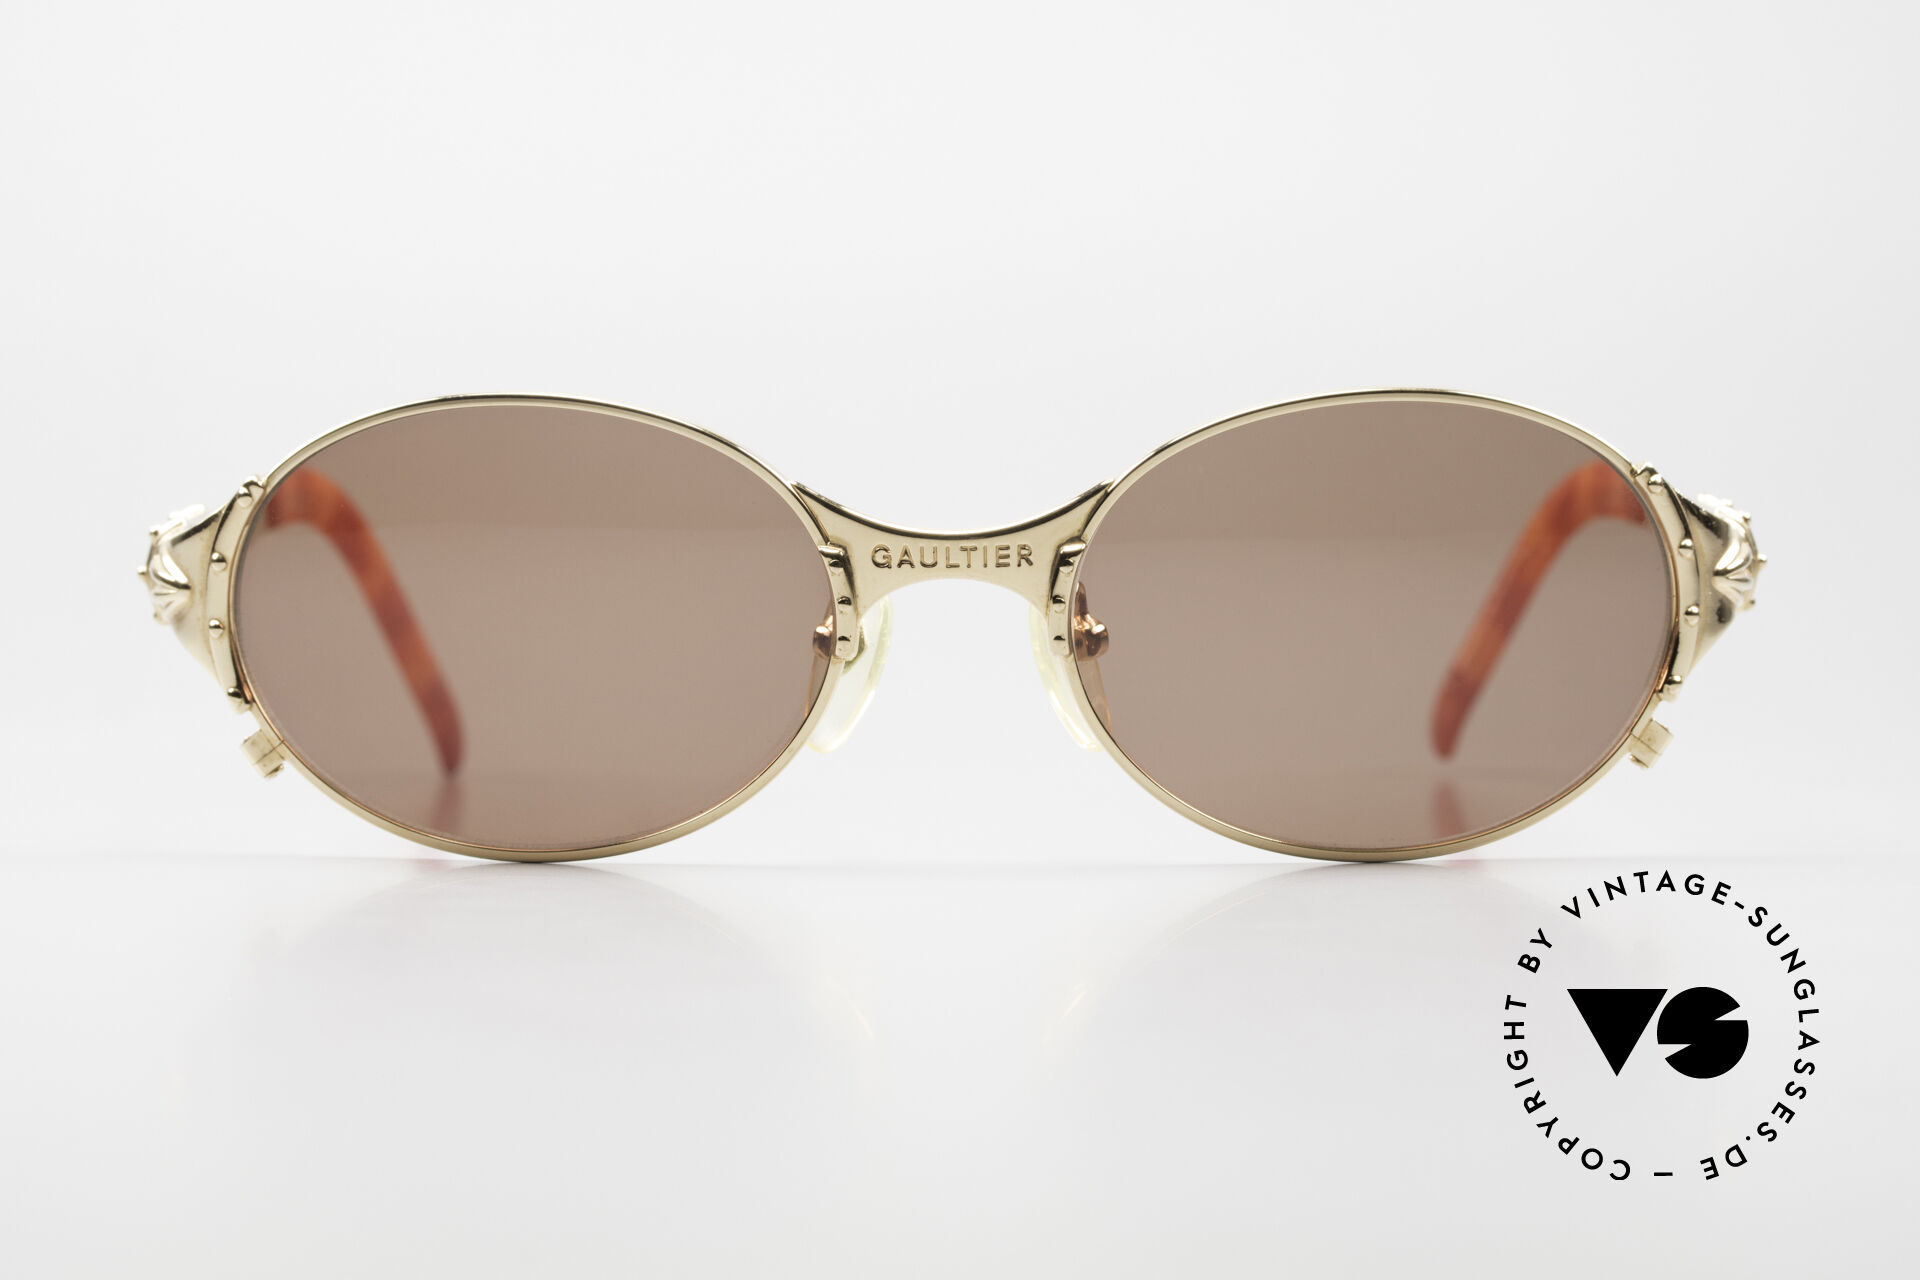 Jean Paul Gaultier 56-5106 90's Sunglasses Gold-Plated